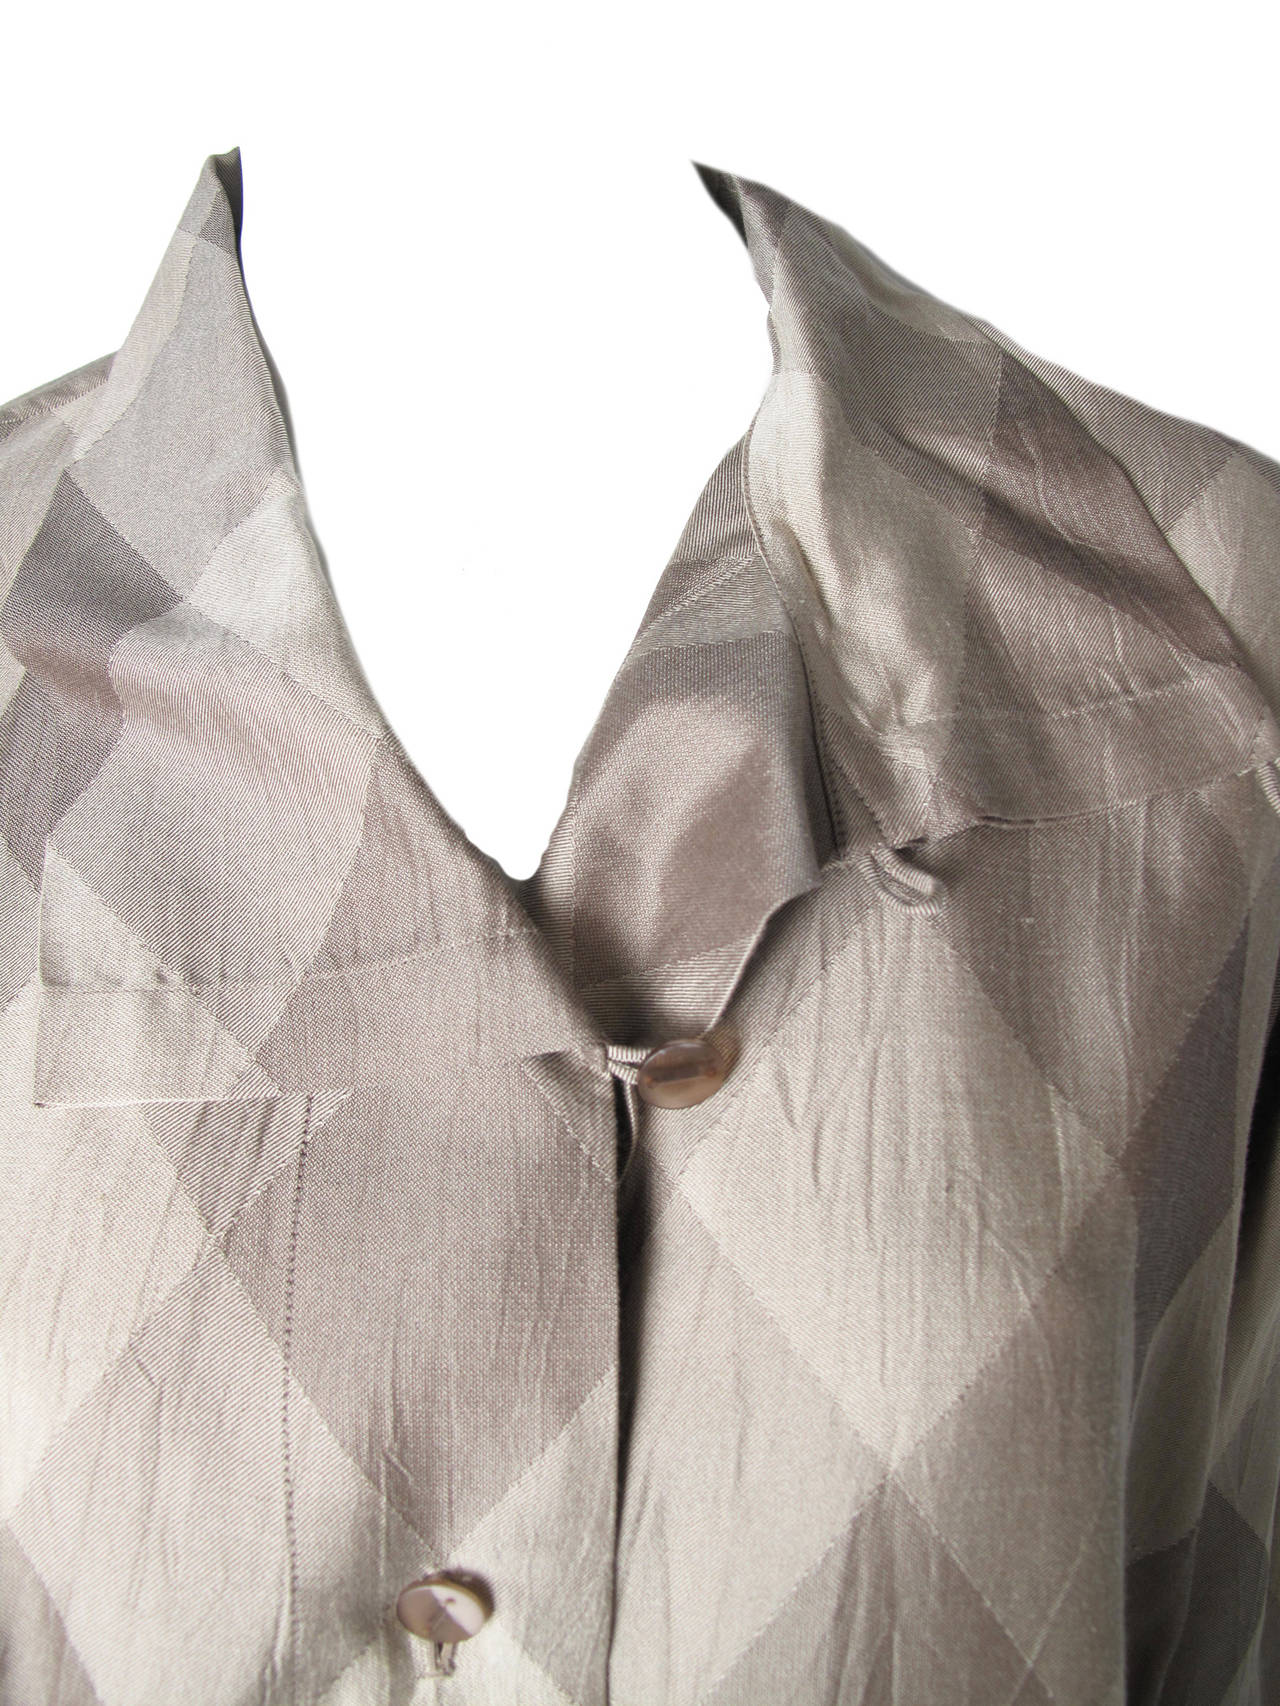 Issey Miyake silk / rayon taupe argyle top and pants. Condition: Excellent. Top: 46